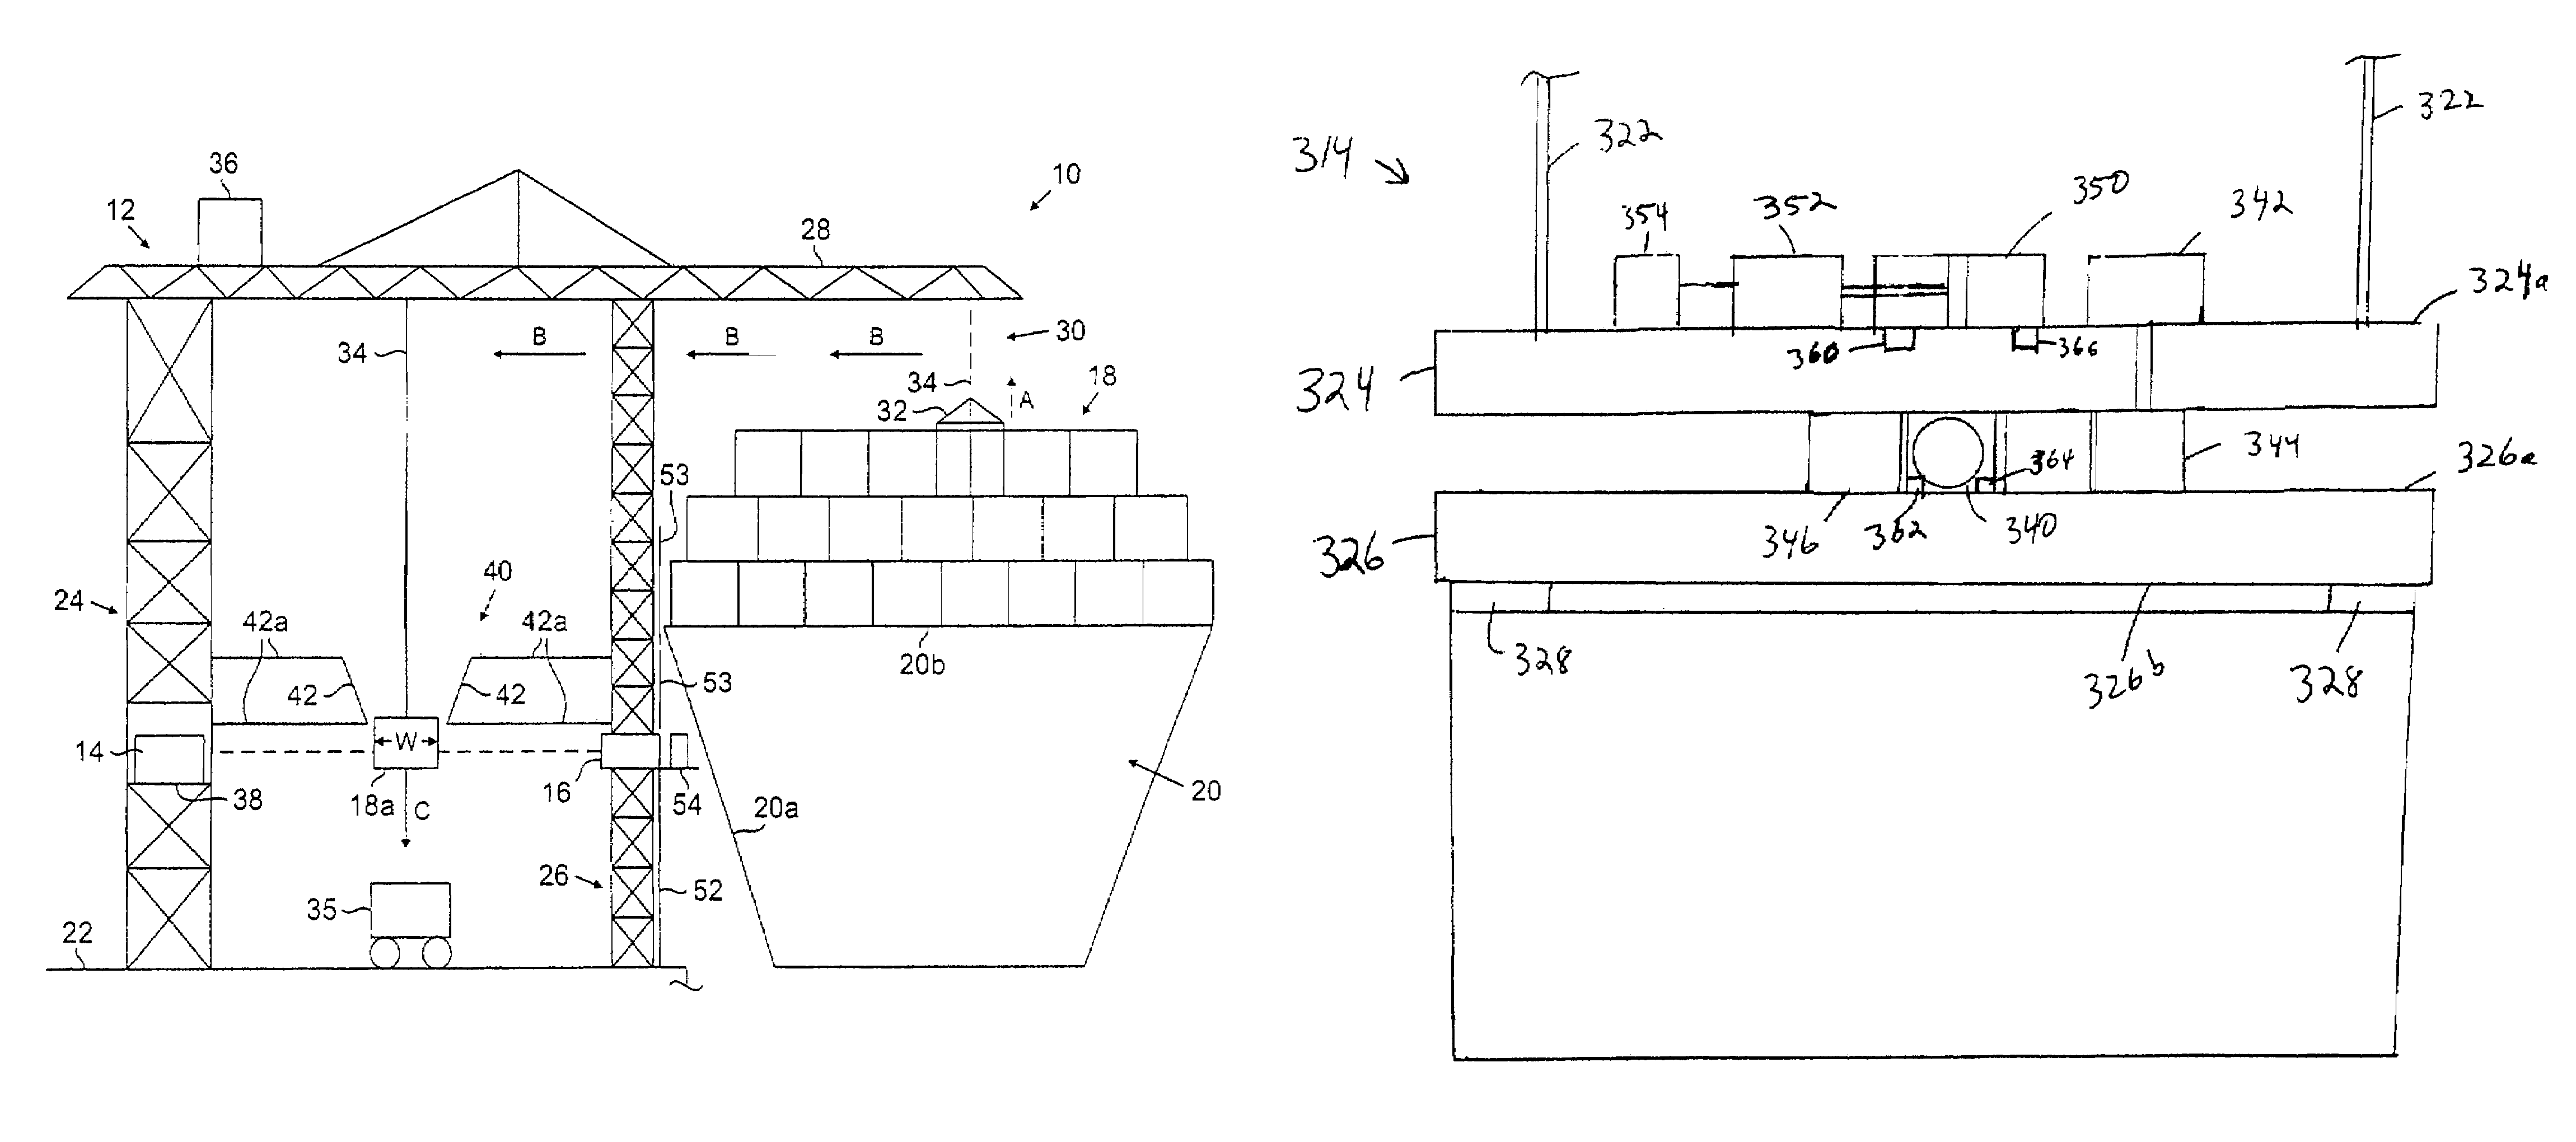 Rotating carriage assembly for use in scanning cargo conveyances transported by a crane